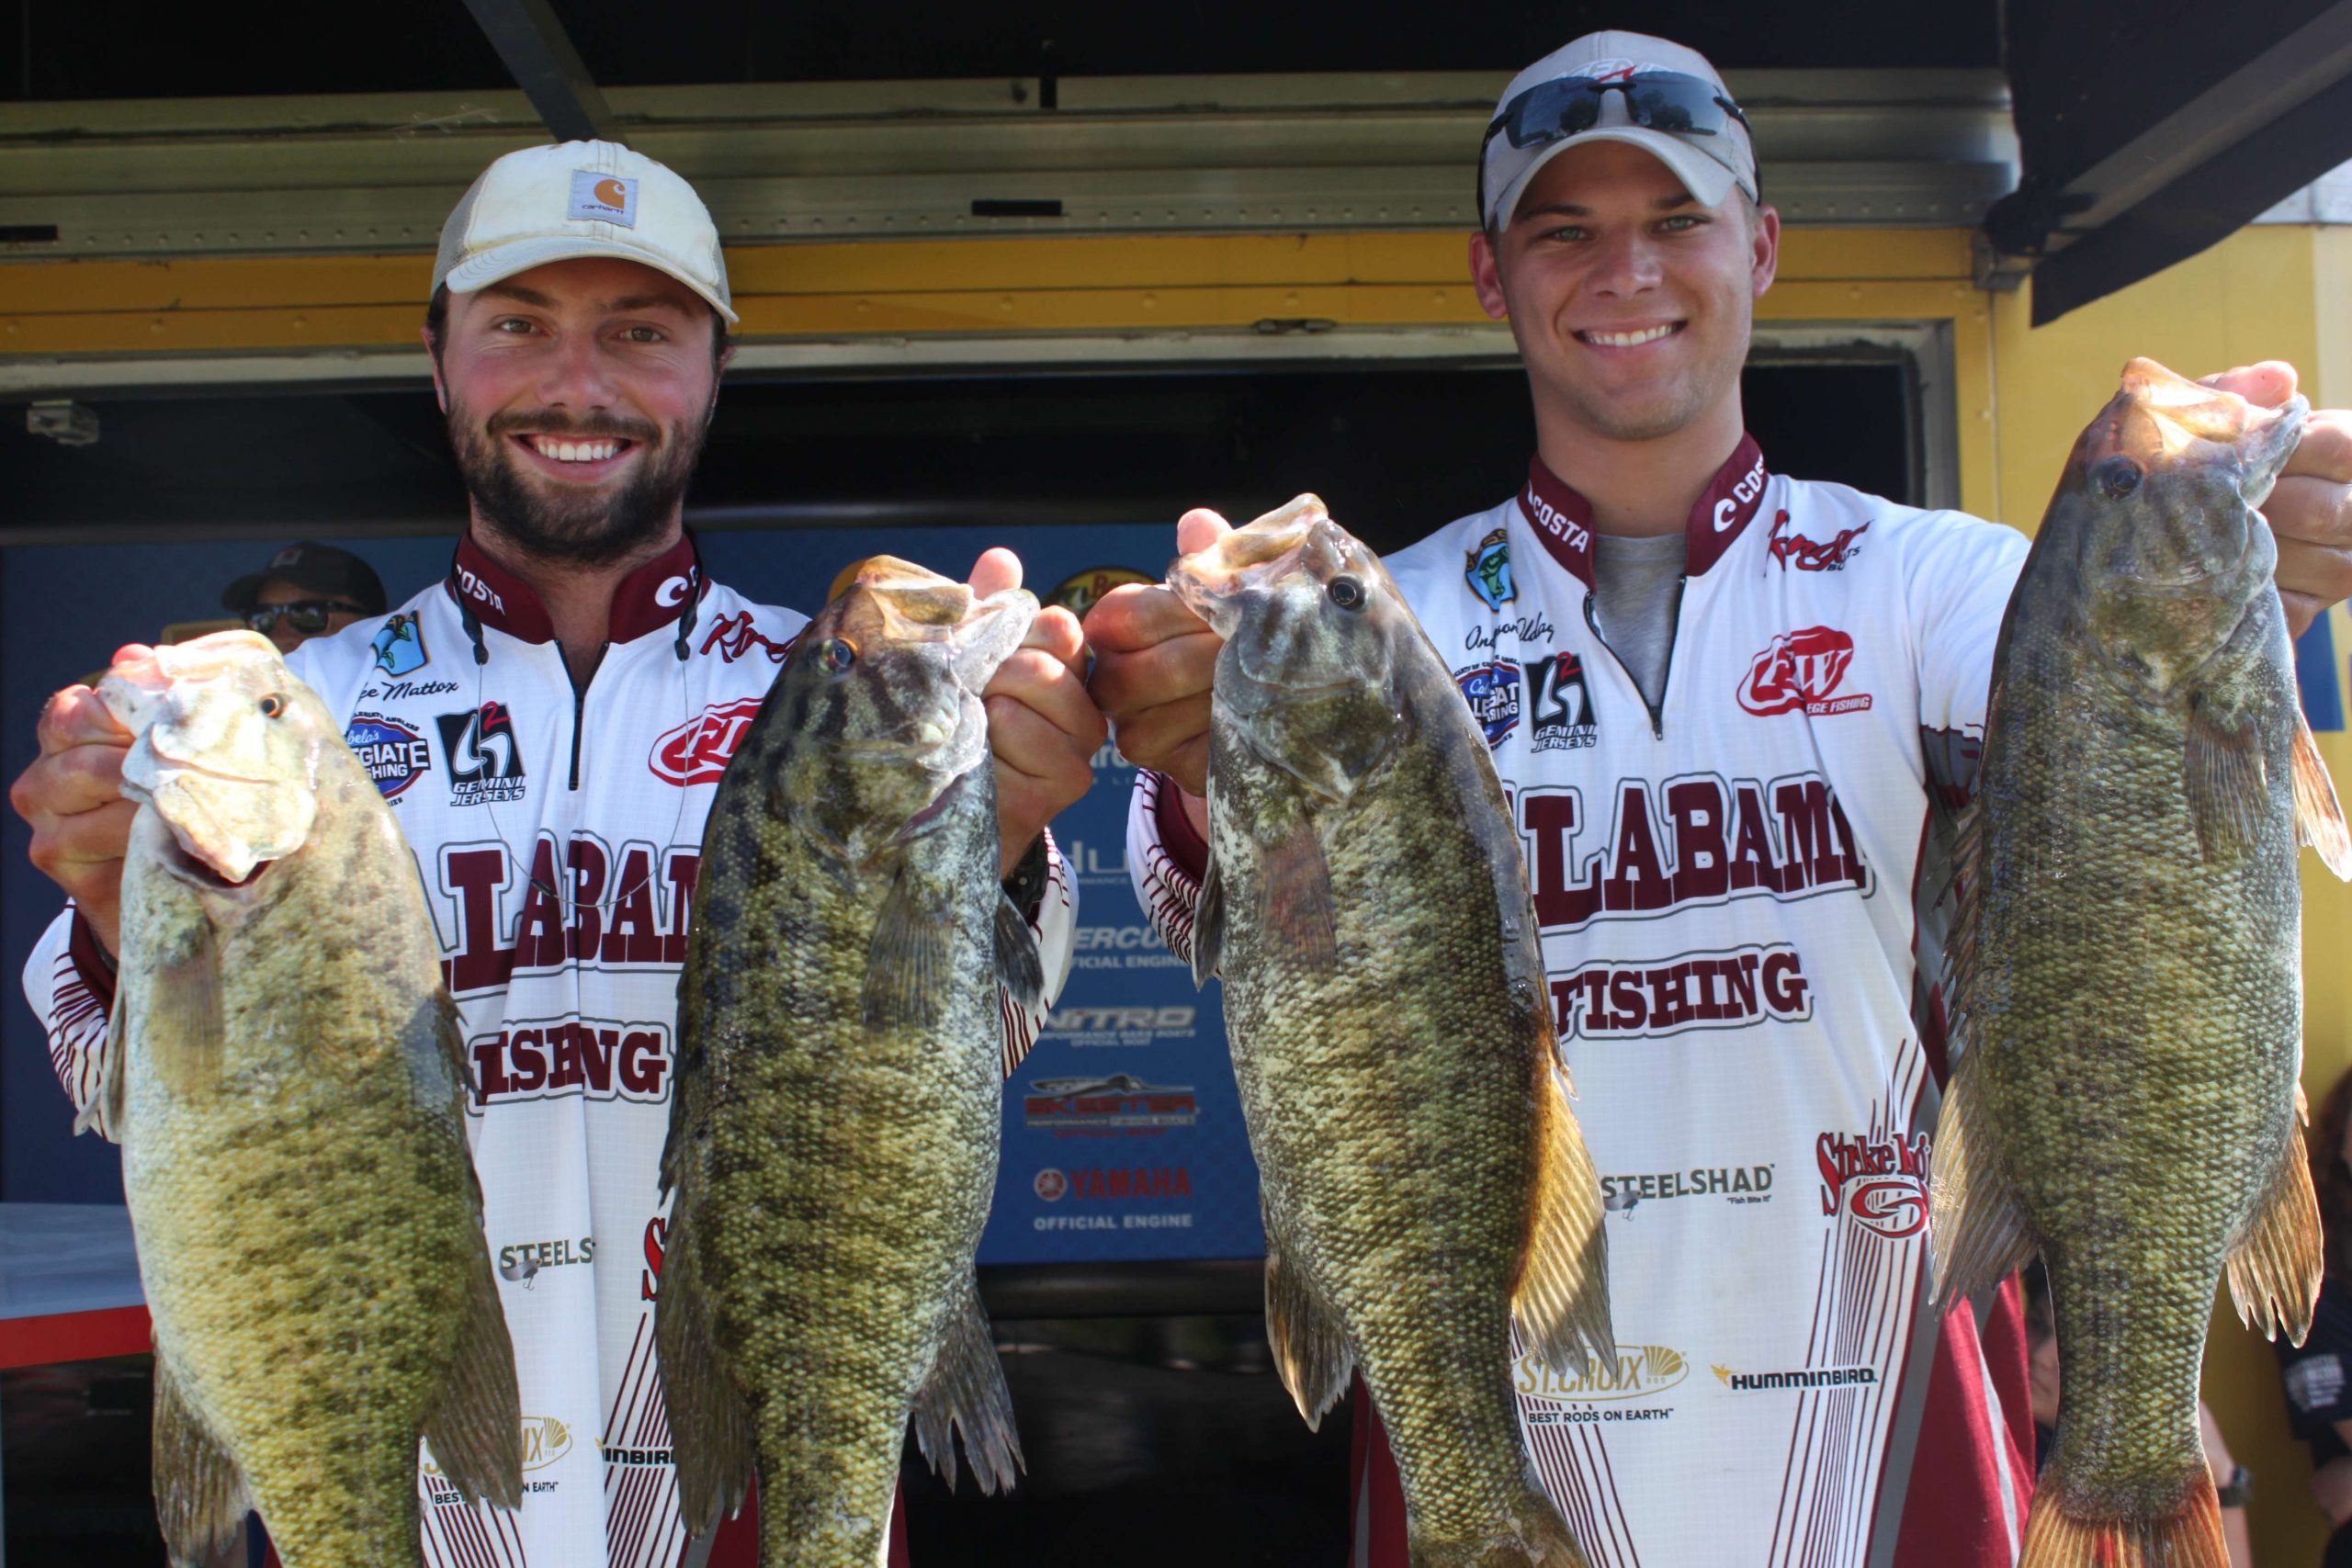 Lee Mattox and Anderson Aldag of the University of Alabama are in third place with 15-7.